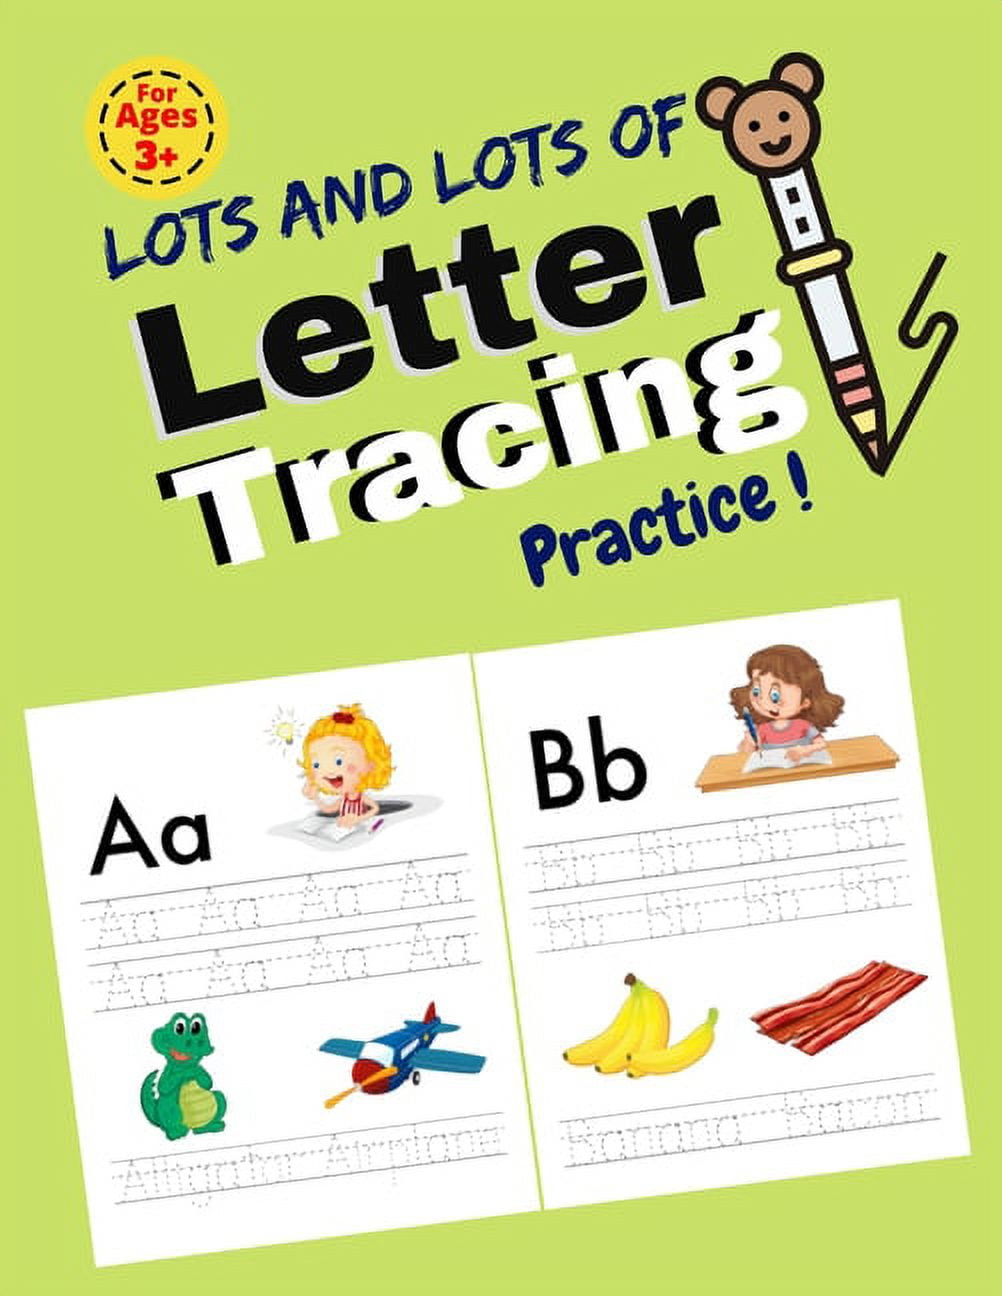 Lots and Lots of Letter Tracing Practice!: Essential writing practice ...